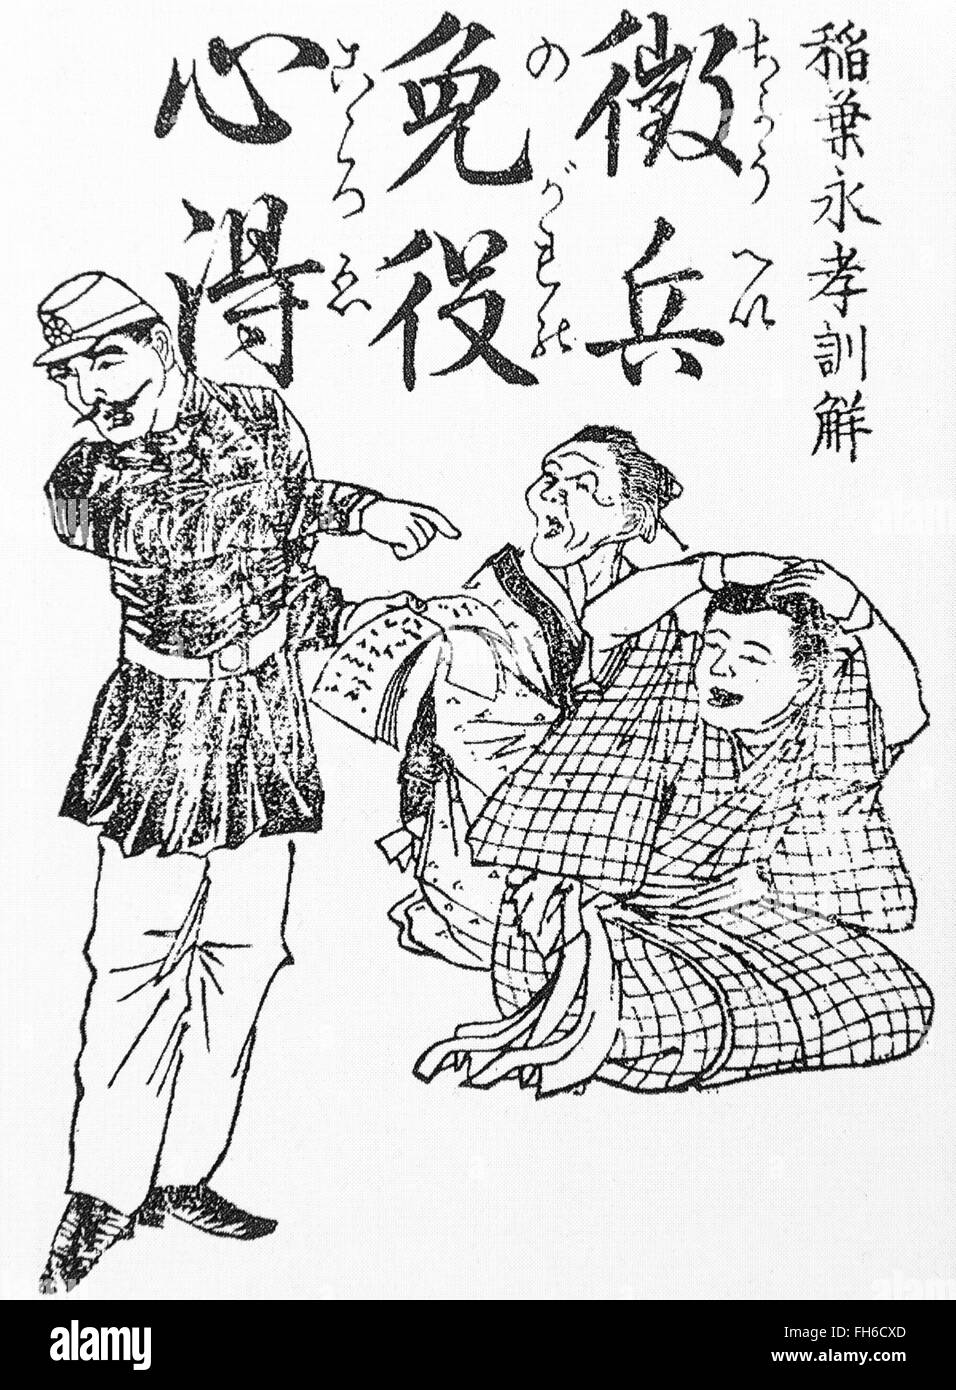 Cover Page of  'How to exempt military service' Meiji period, Japan. Stock Photo